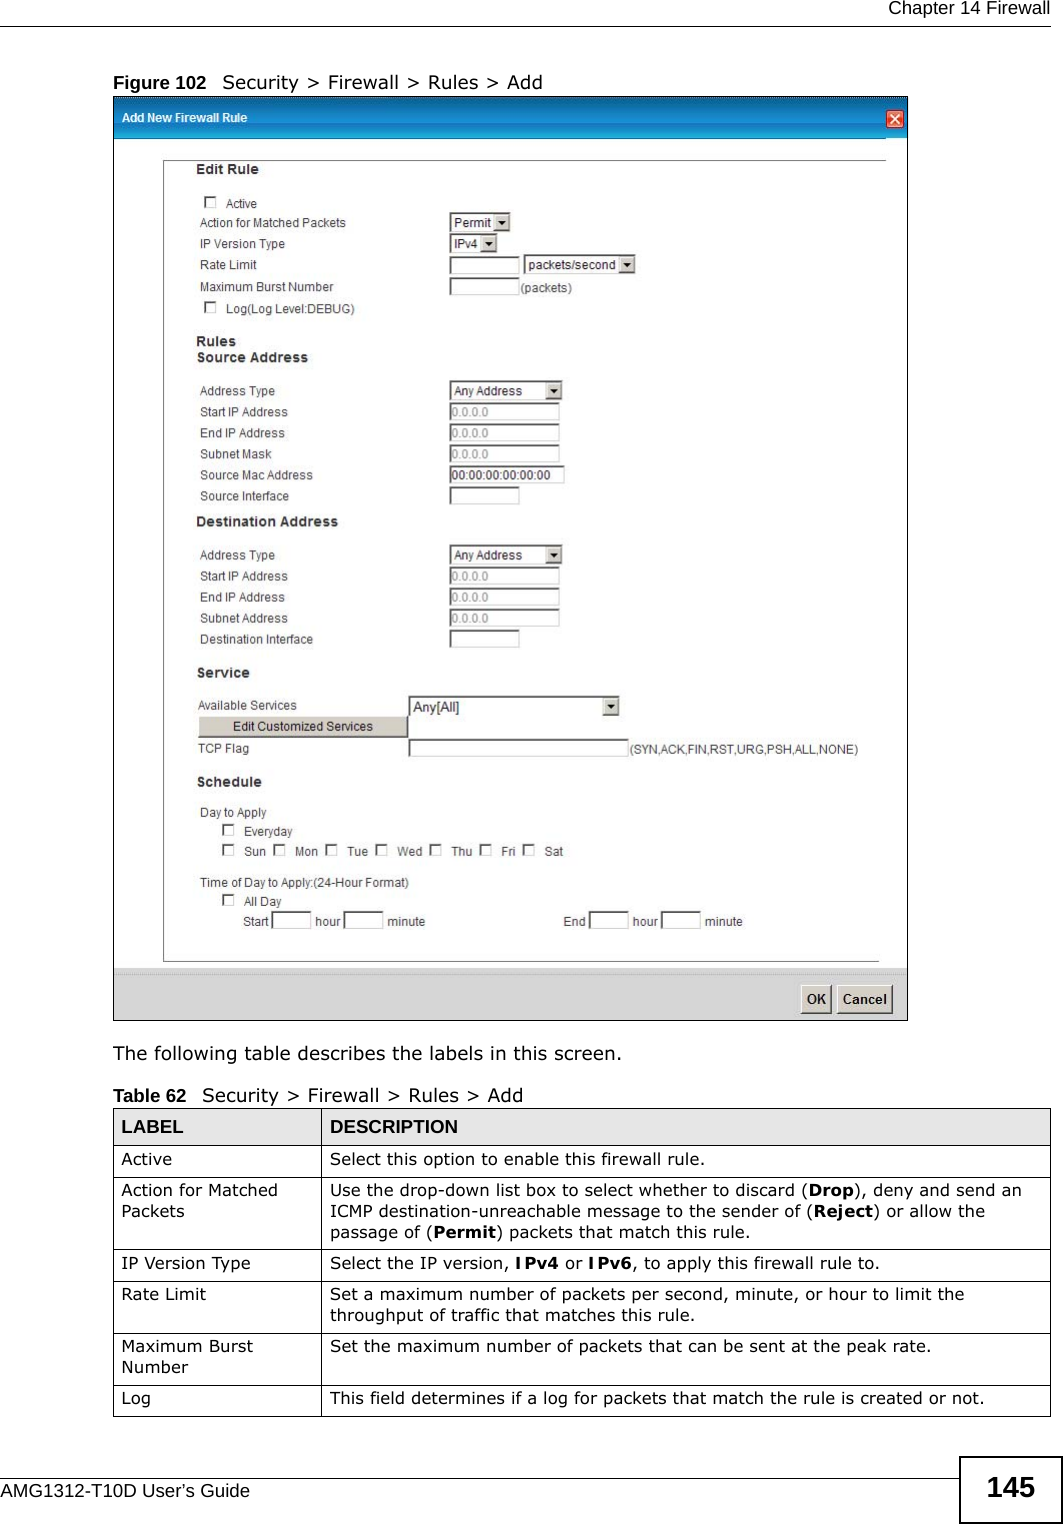  Chapter 14 FirewallAMG1312-T10D User’s Guide 145Figure 102   Security &gt; Firewall &gt; Rules &gt; Add The following table describes the labels in this screen. Table 62   Security &gt; Firewall &gt; Rules &gt; AddLABEL DESCRIPTIONActive Select this option to enable this firewall rule. Action for Matched PacketsUse the drop-down list box to select whether to discard (Drop), deny and send an ICMP destination-unreachable message to the sender of (Reject) or allow the passage of (Permit) packets that match this rule. IP Version Type  Select the IP version, IPv4 or IPv6, to apply this firewall rule to.Rate Limit Set a maximum number of packets per second, minute, or hour to limit the throughput of traffic that matches this rule. Maximum Burst NumberSet the maximum number of packets that can be sent at the peak rate. Log This field determines if a log for packets that match the rule is created or not. 